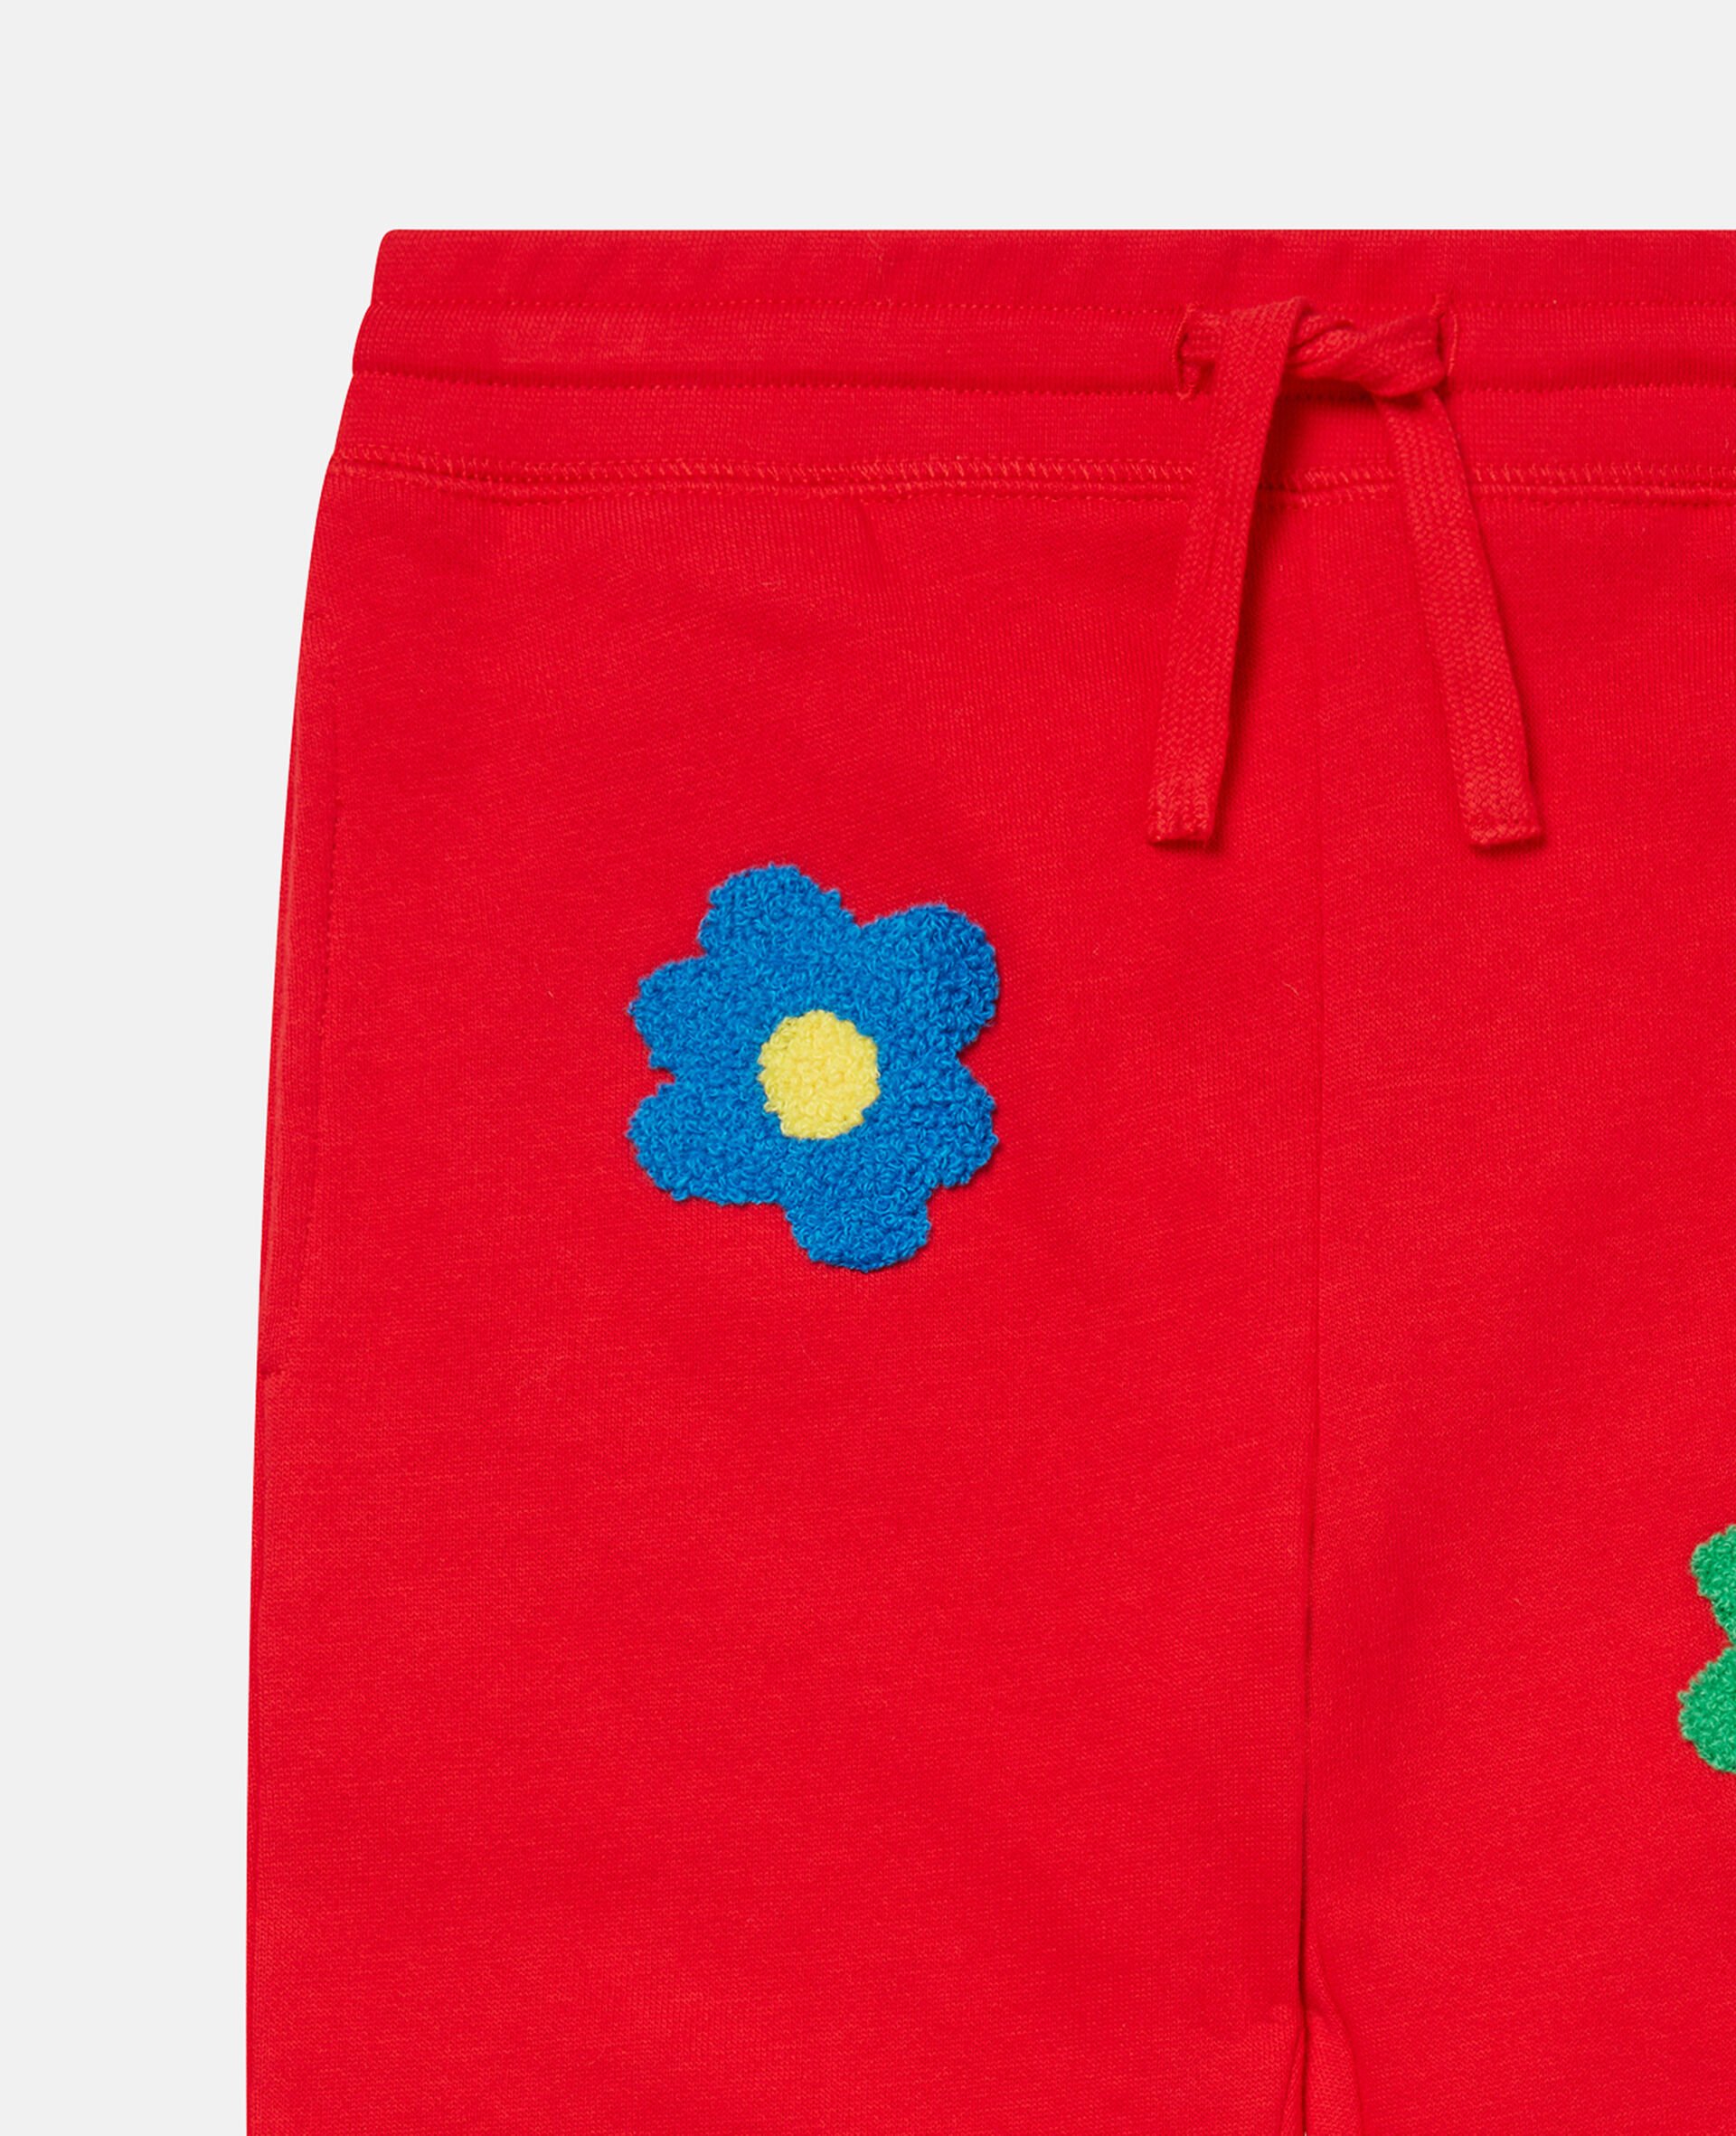 Flower Embroidered Fleece Joggers-Red-large image number 1